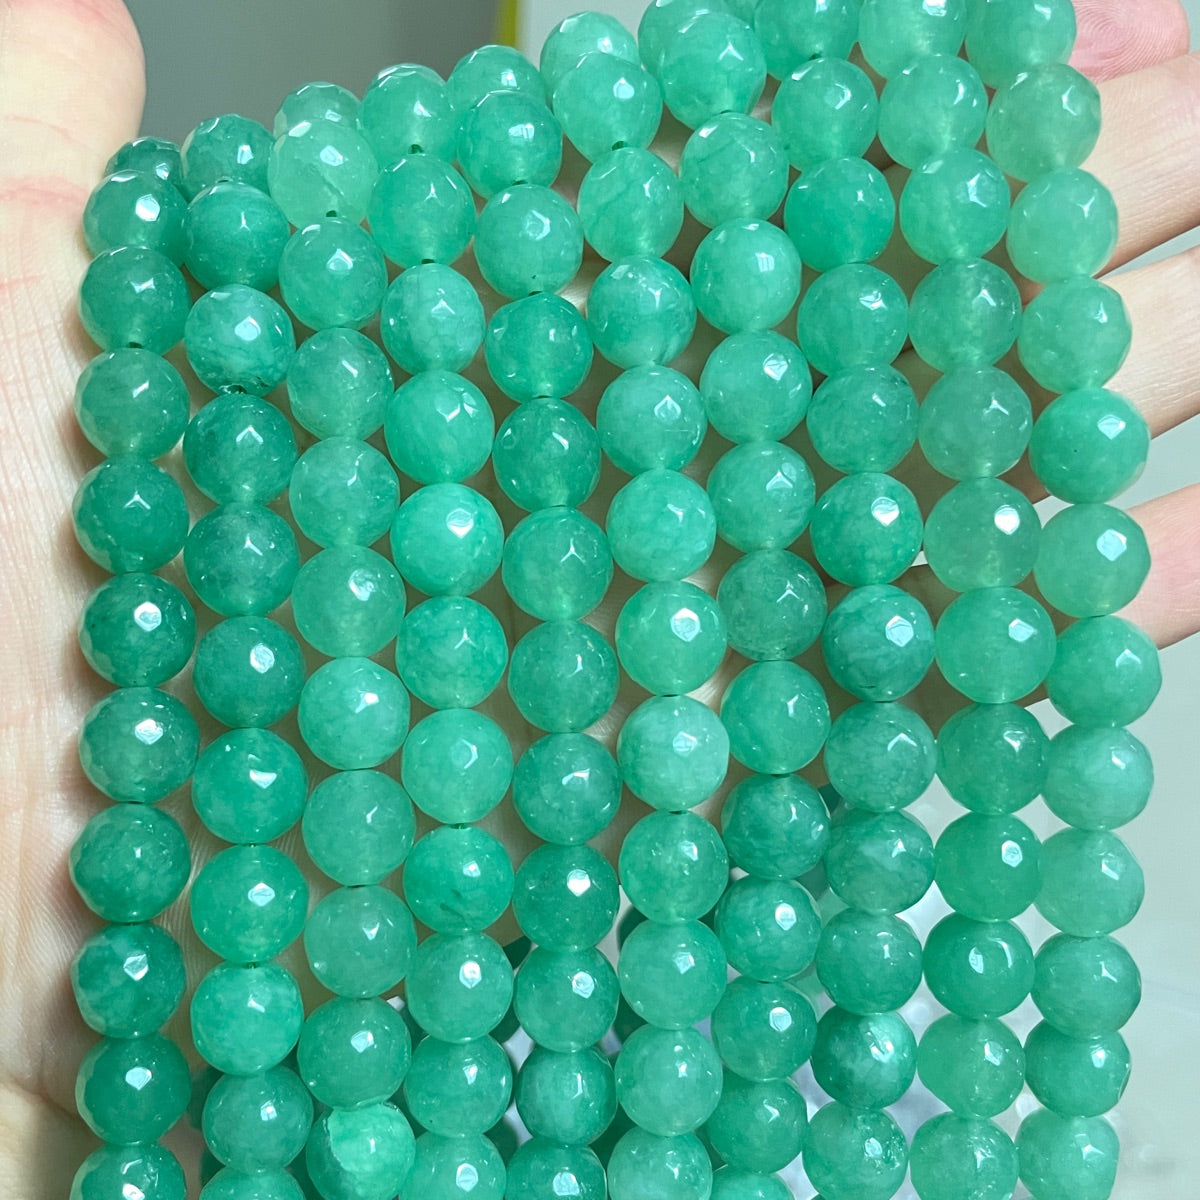 2 Strands/lot 10mm Mint Green Faceted Jade Stone Beads Stone Beads Faceted Jade Beads New Beads Arrivals Charms Beads Beyond